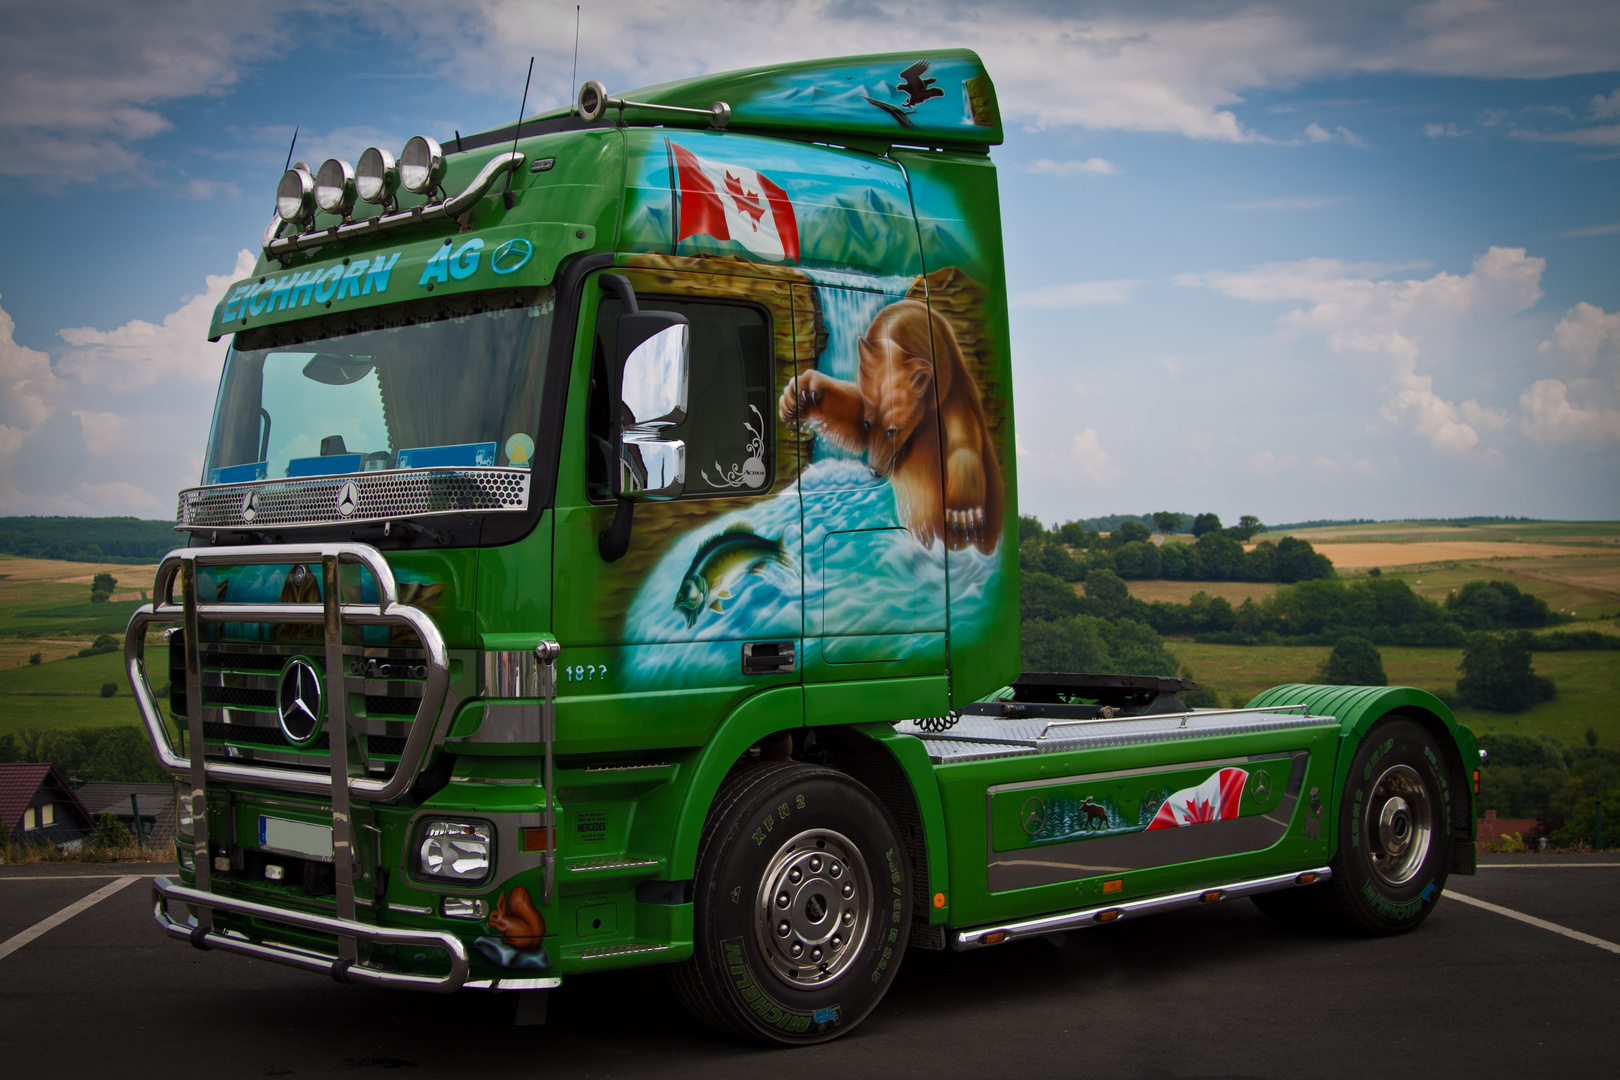 Actros 18??